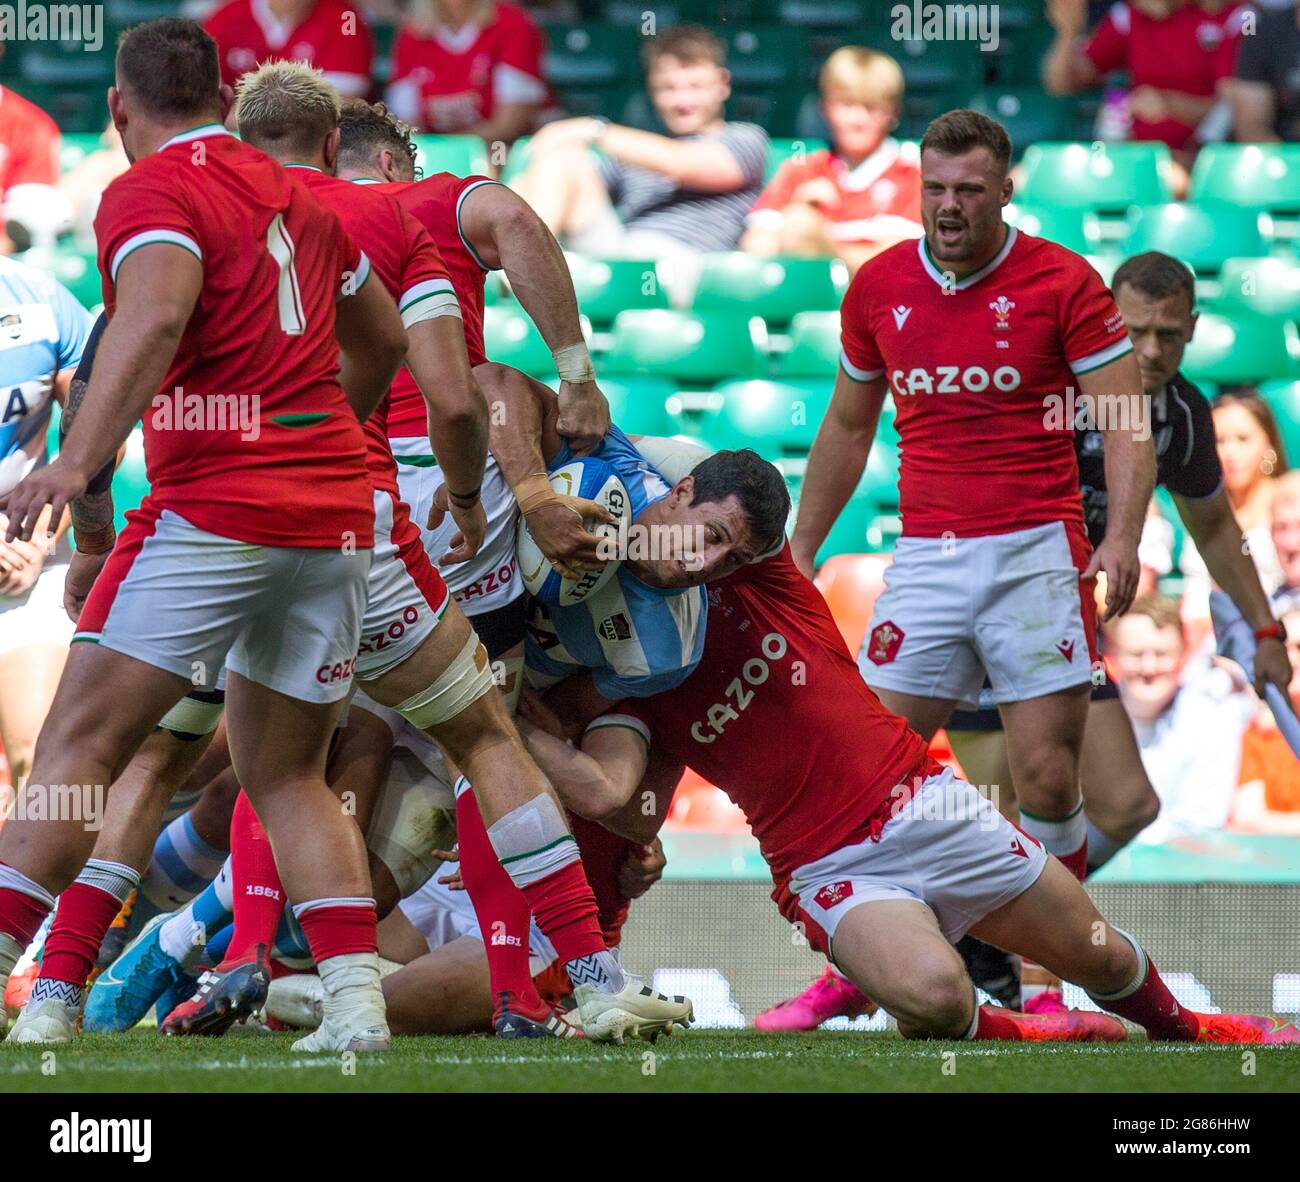 Cardiff, UK. 17th July, 2021. Cardiff, UK. July 17th : Matias Moroni (Argentina) controls the ball during the 2021 Summer Internationals match between Wales and Argentina at Principality Stadium. Credit: Federico Guerra Morán/Alamy Live News Stock Photo